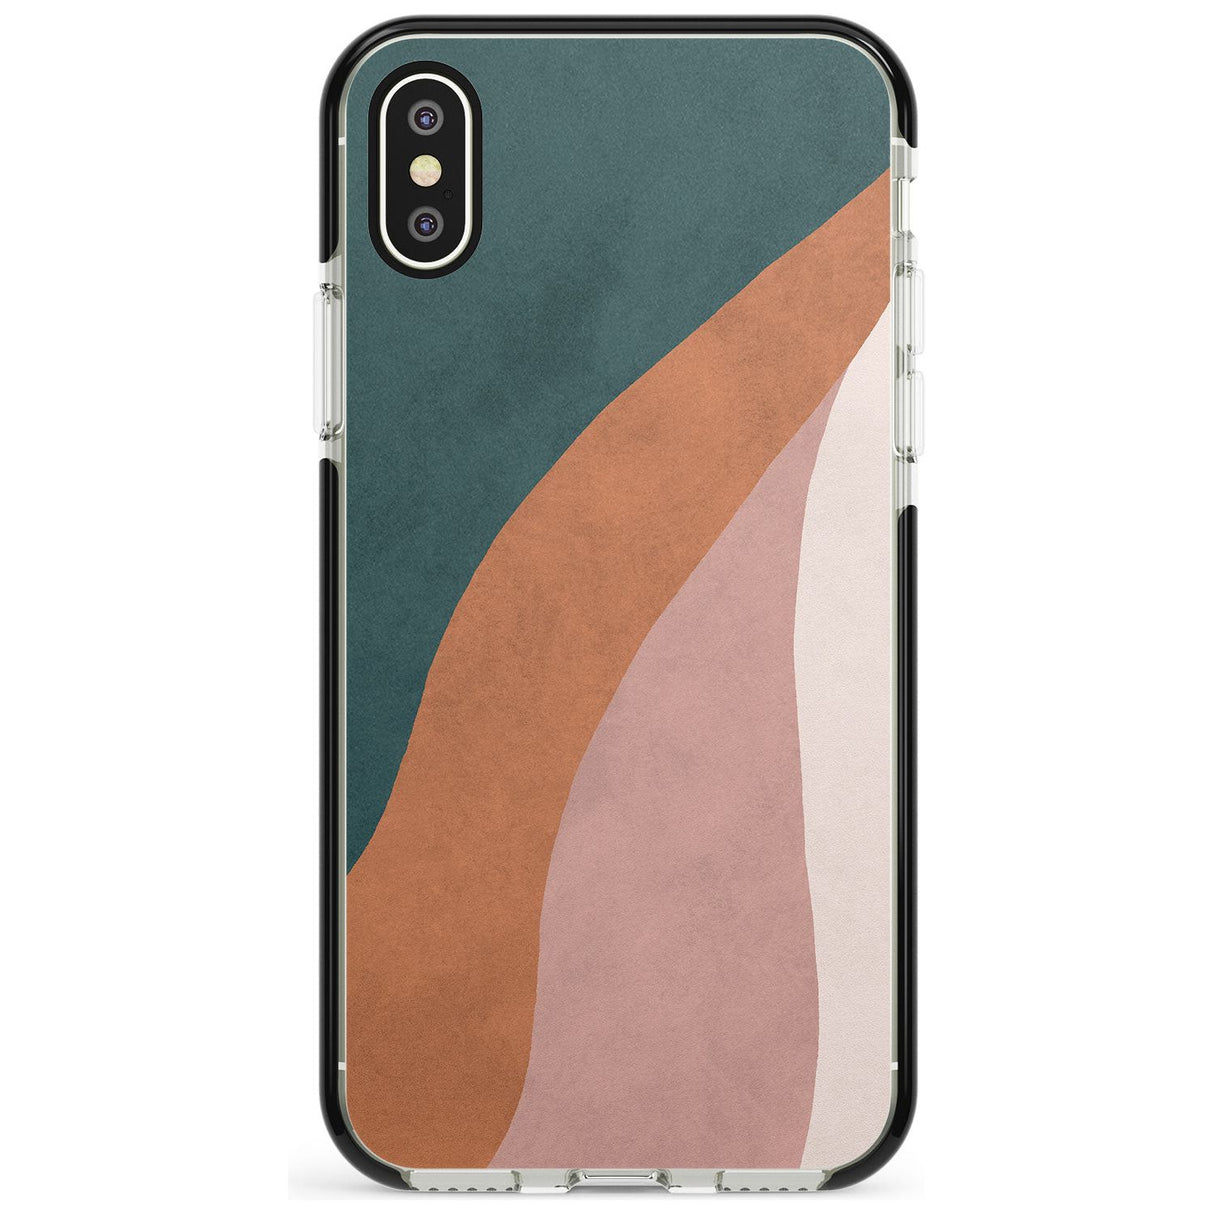 Lush Abstract Watercolour: Design #7 Black Impact Phone Case for iPhone X XS Max XR